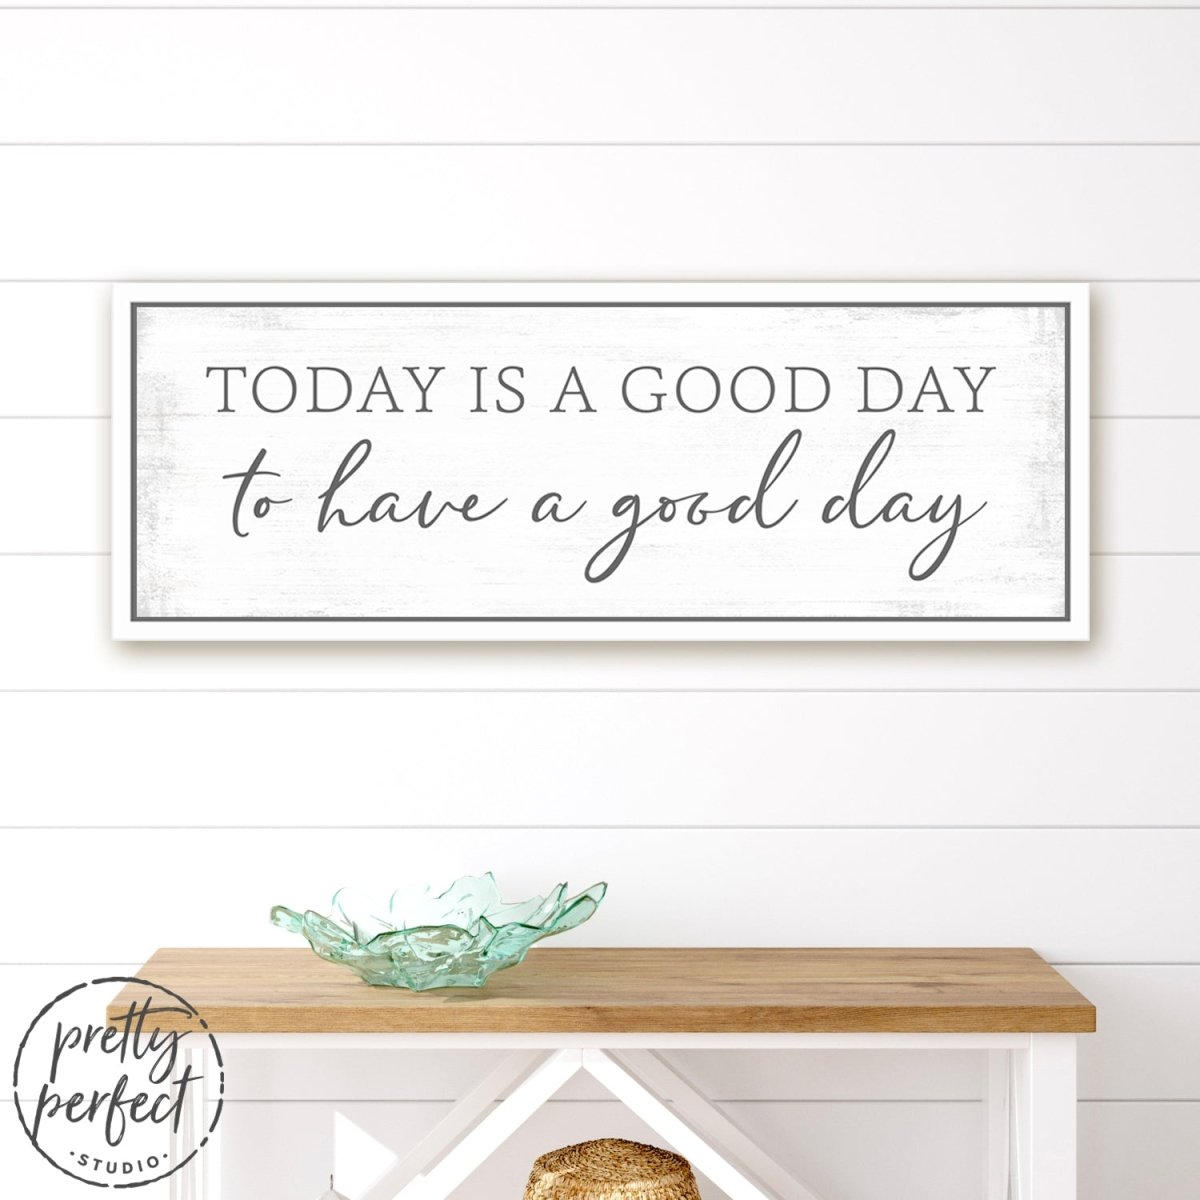 Today Is a Good Day to Have a Good Day Sign In Living Room - Pretty Perfect Studio